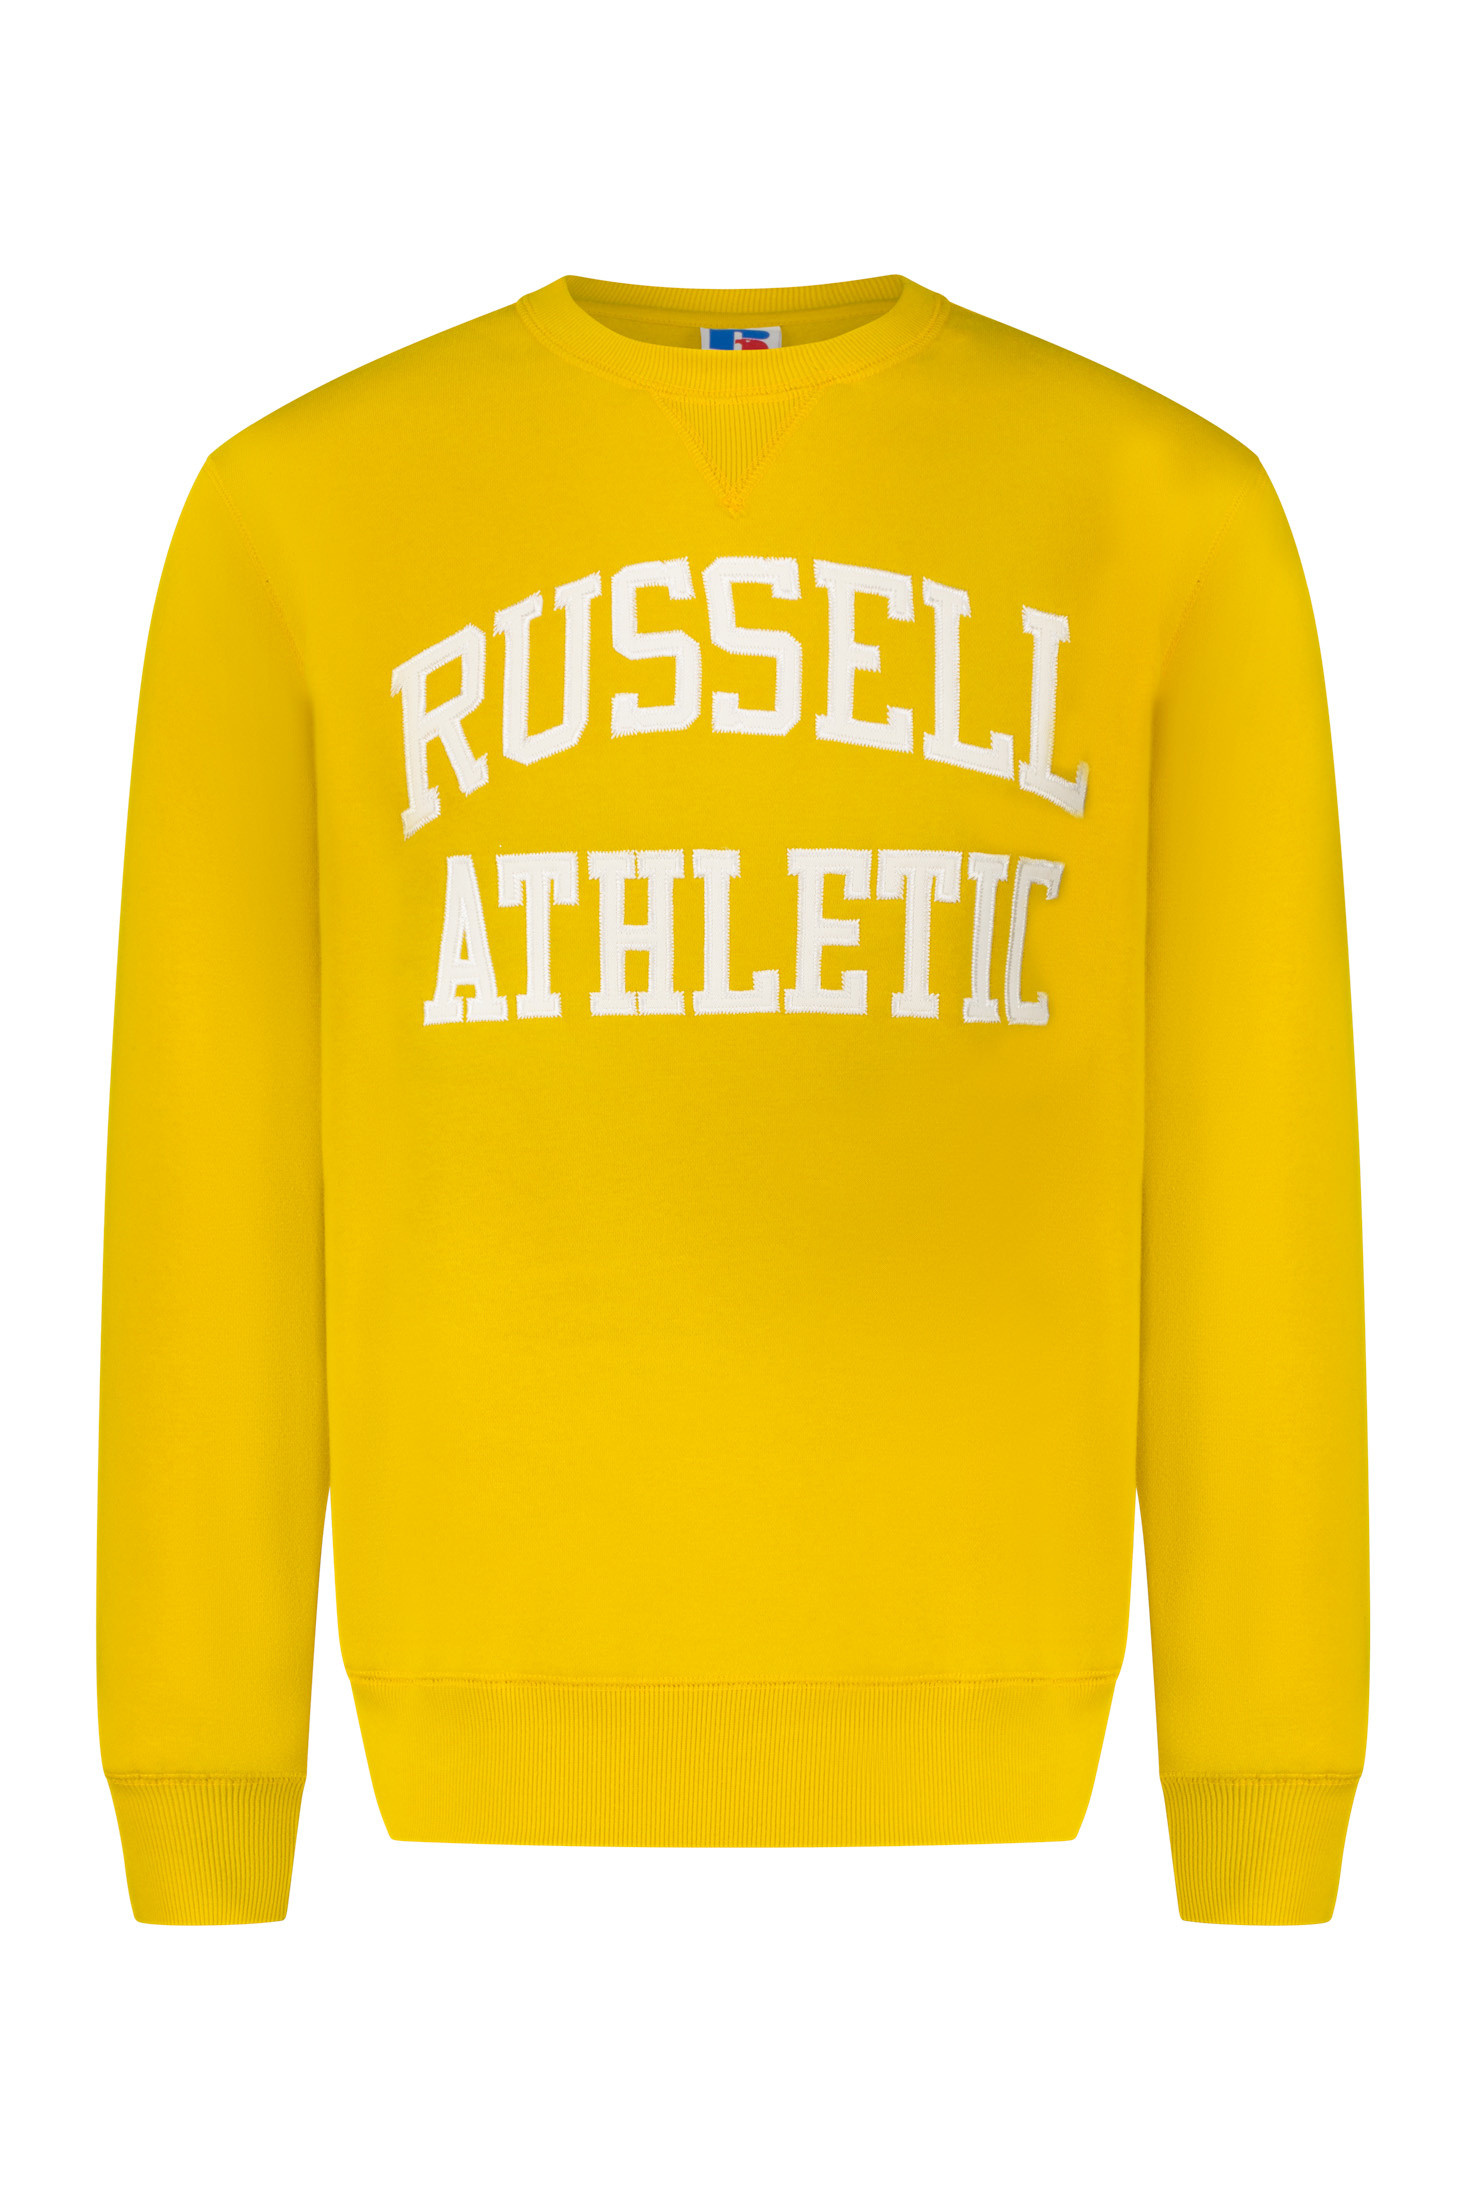 Russell Athletic - Felpa con ricamo, Giallo, large image number 0